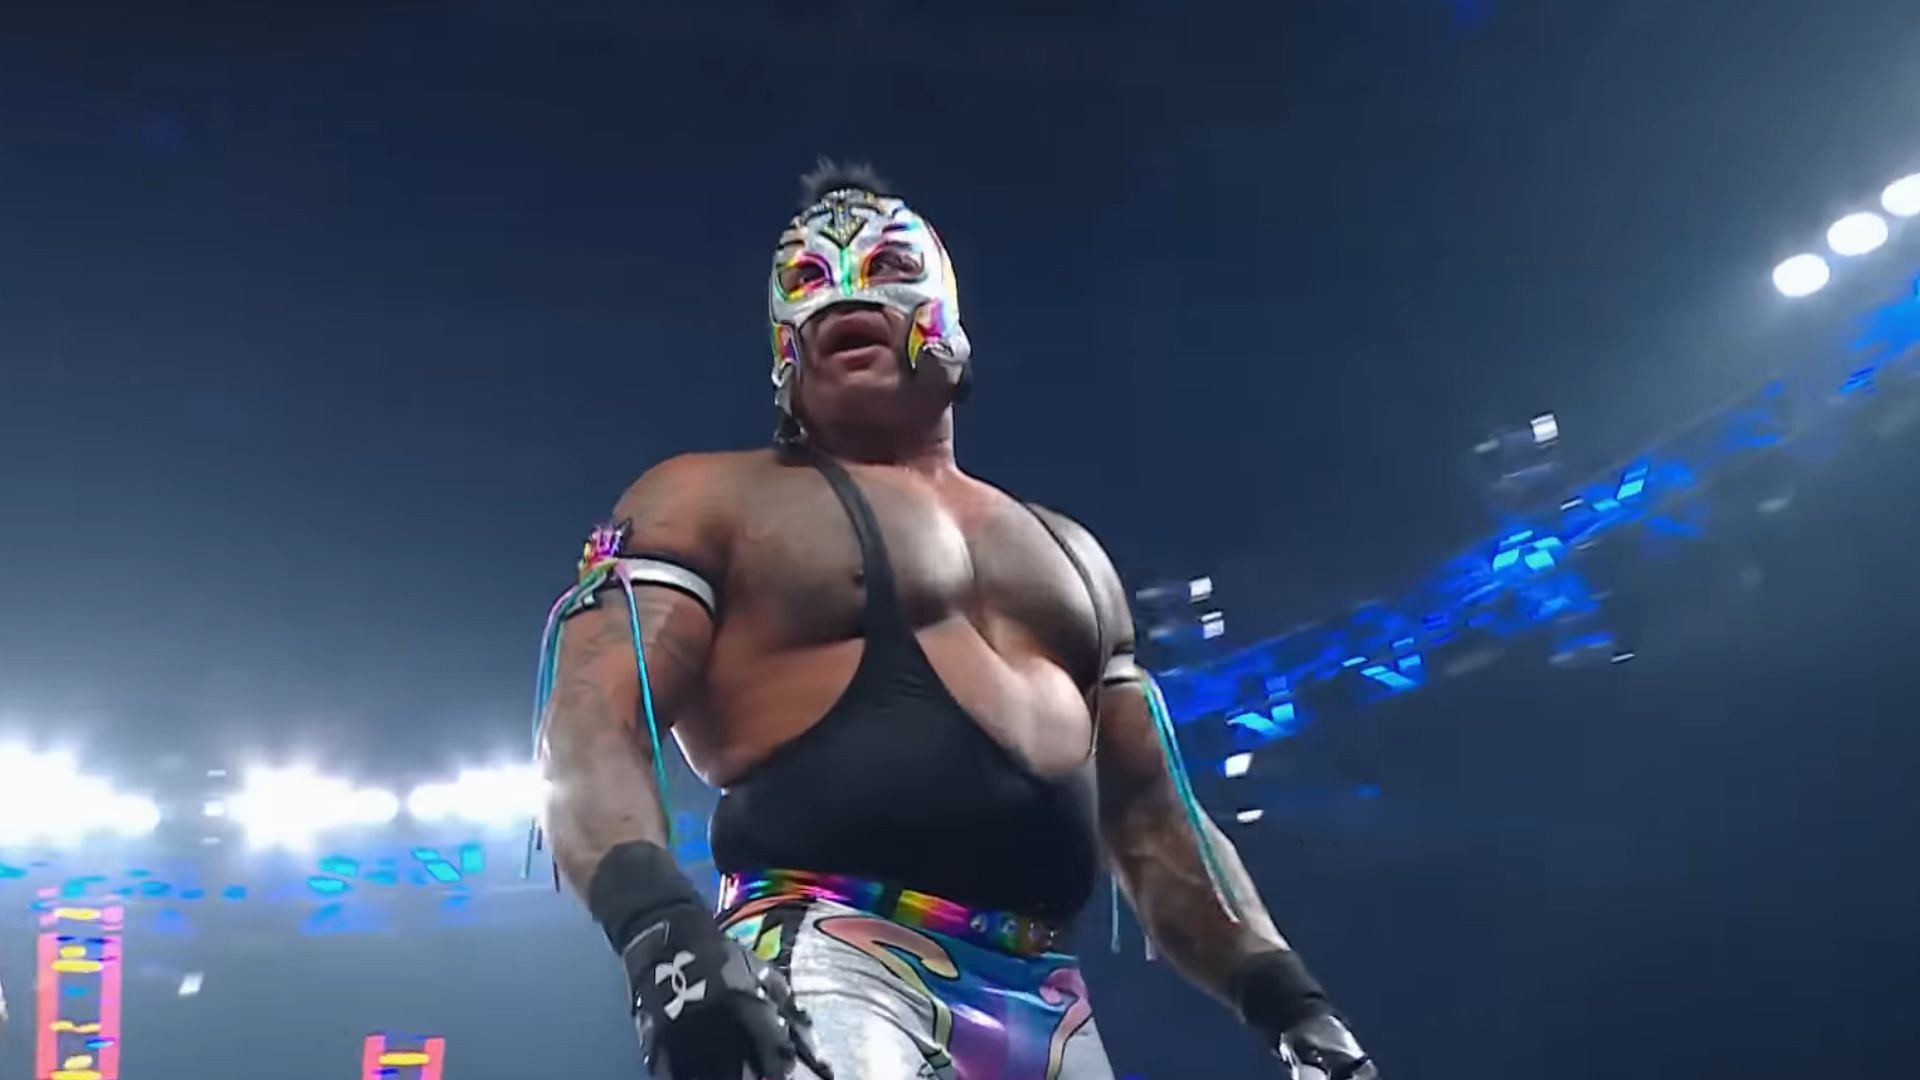 Rey Mysterio is a WWE Hall of Famer